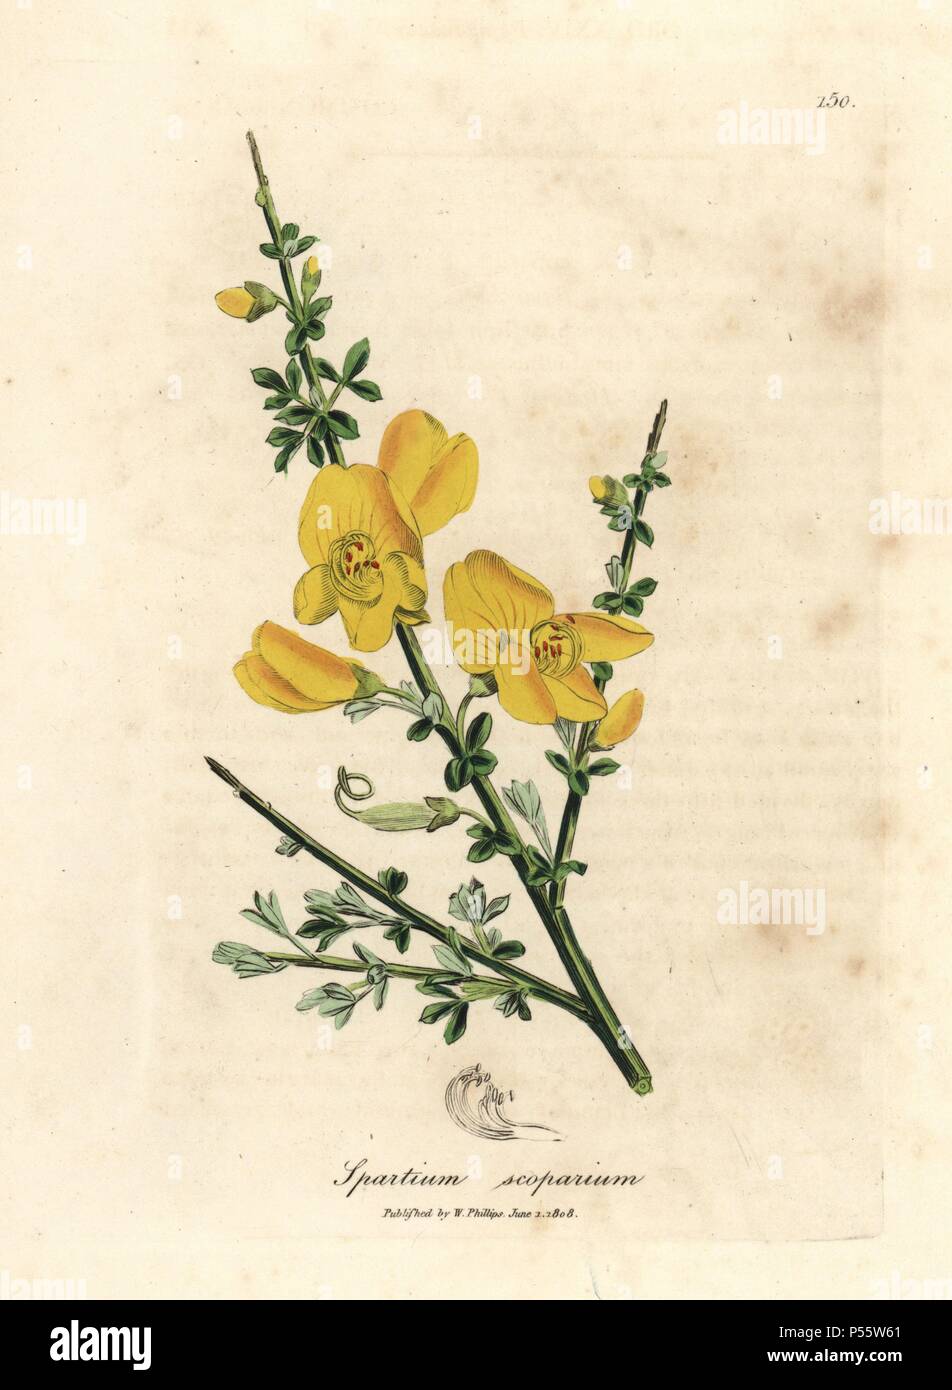 Common broom, Cytisus scoparius. Handcoloured copperplate engraving from a botanical illustration by James Sowerby from William Woodville and Sir William Jackson Hooker's 'Medical Botany,' John Bohn, London, 1832. The tireless Sowerby (1757-1822) drew over 2, 500 plants for Smith's mammoth 'English Botany' (1790-1814) and 440 mushrooms for 'Coloured Figures of English Fungi ' (1797) among many other works. Stock Photo